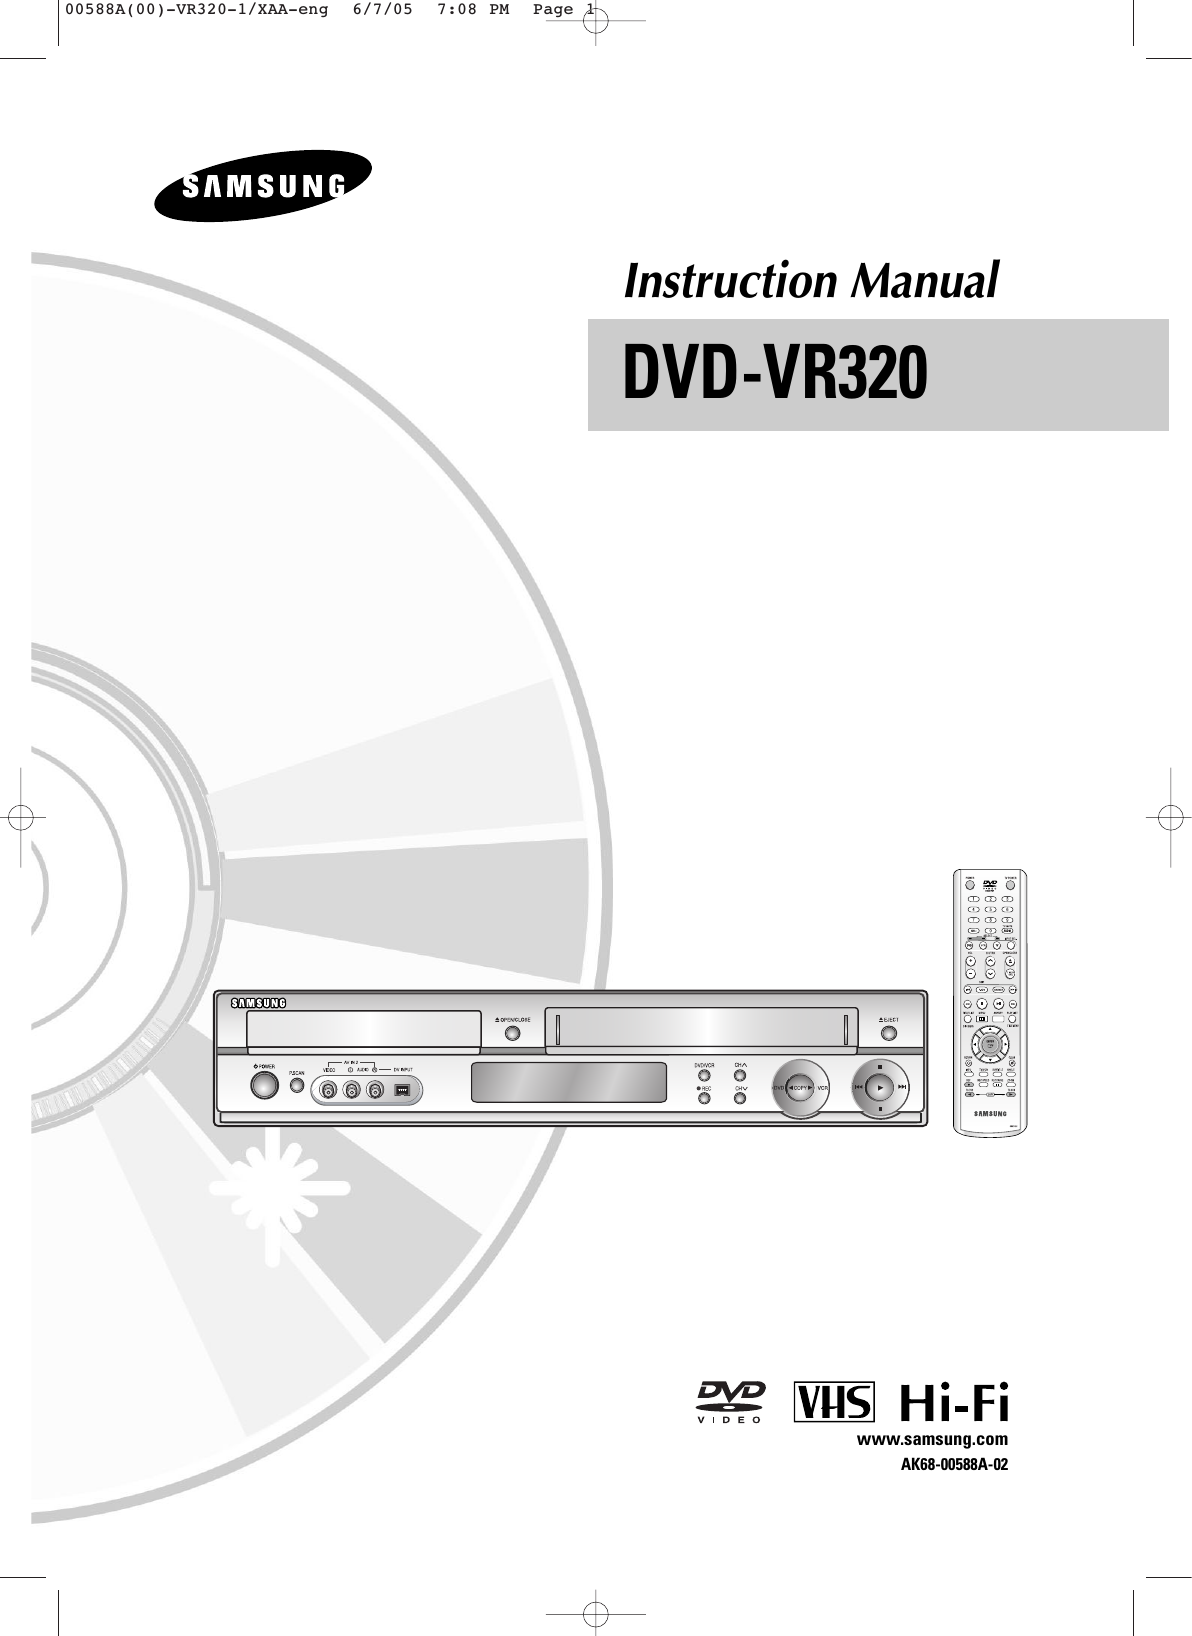 Instruction ManualDVD-VR320www.samsung.comAK68-00588A-0200588A(00)-VR320-1/XAA-eng  6/7/05  7:08 PM  Page 1